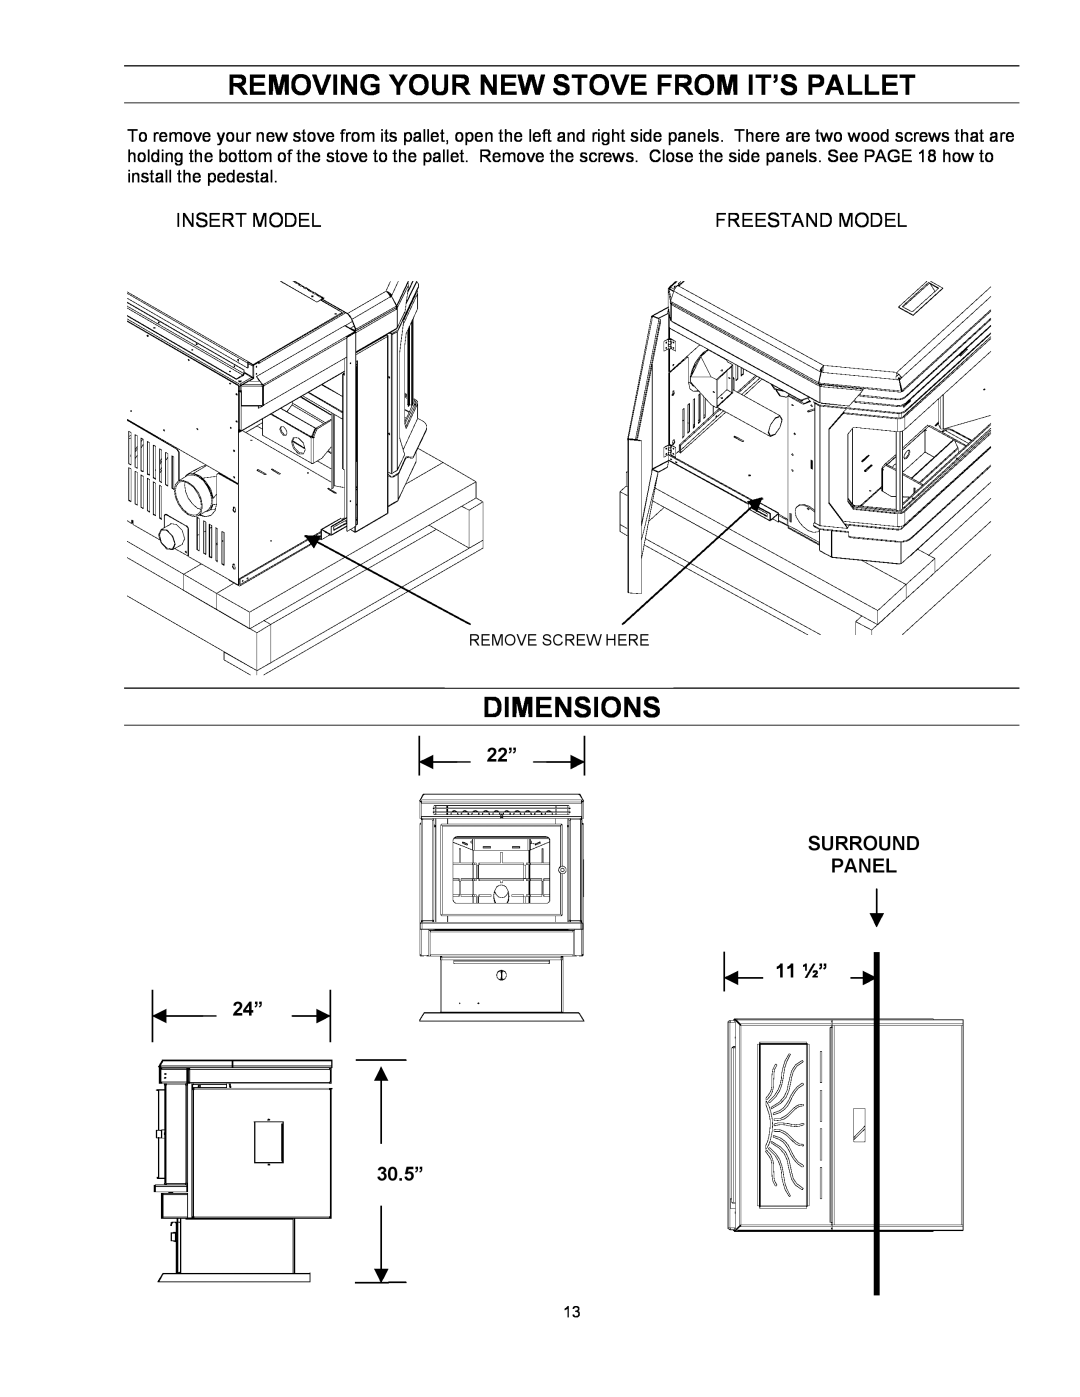 Enviro EF-II I technical manual Removing Your New Stove From It’S Pallet, Dimensions, 22” SURROUND PANEL 11 ½” 24” 30.5” 